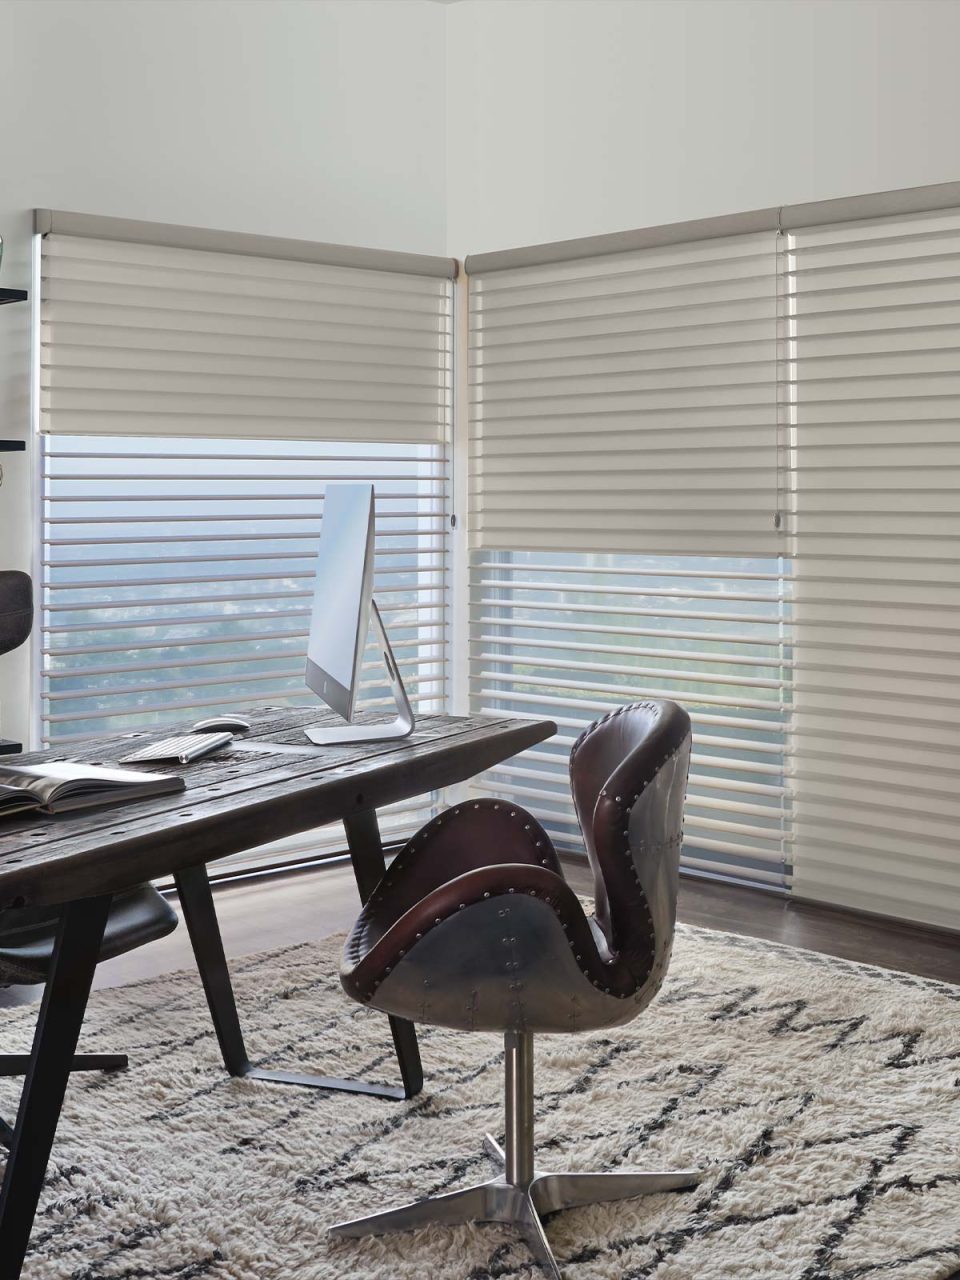 Hunter Douglas Silhouette Shades with DuoLite Operating System installed